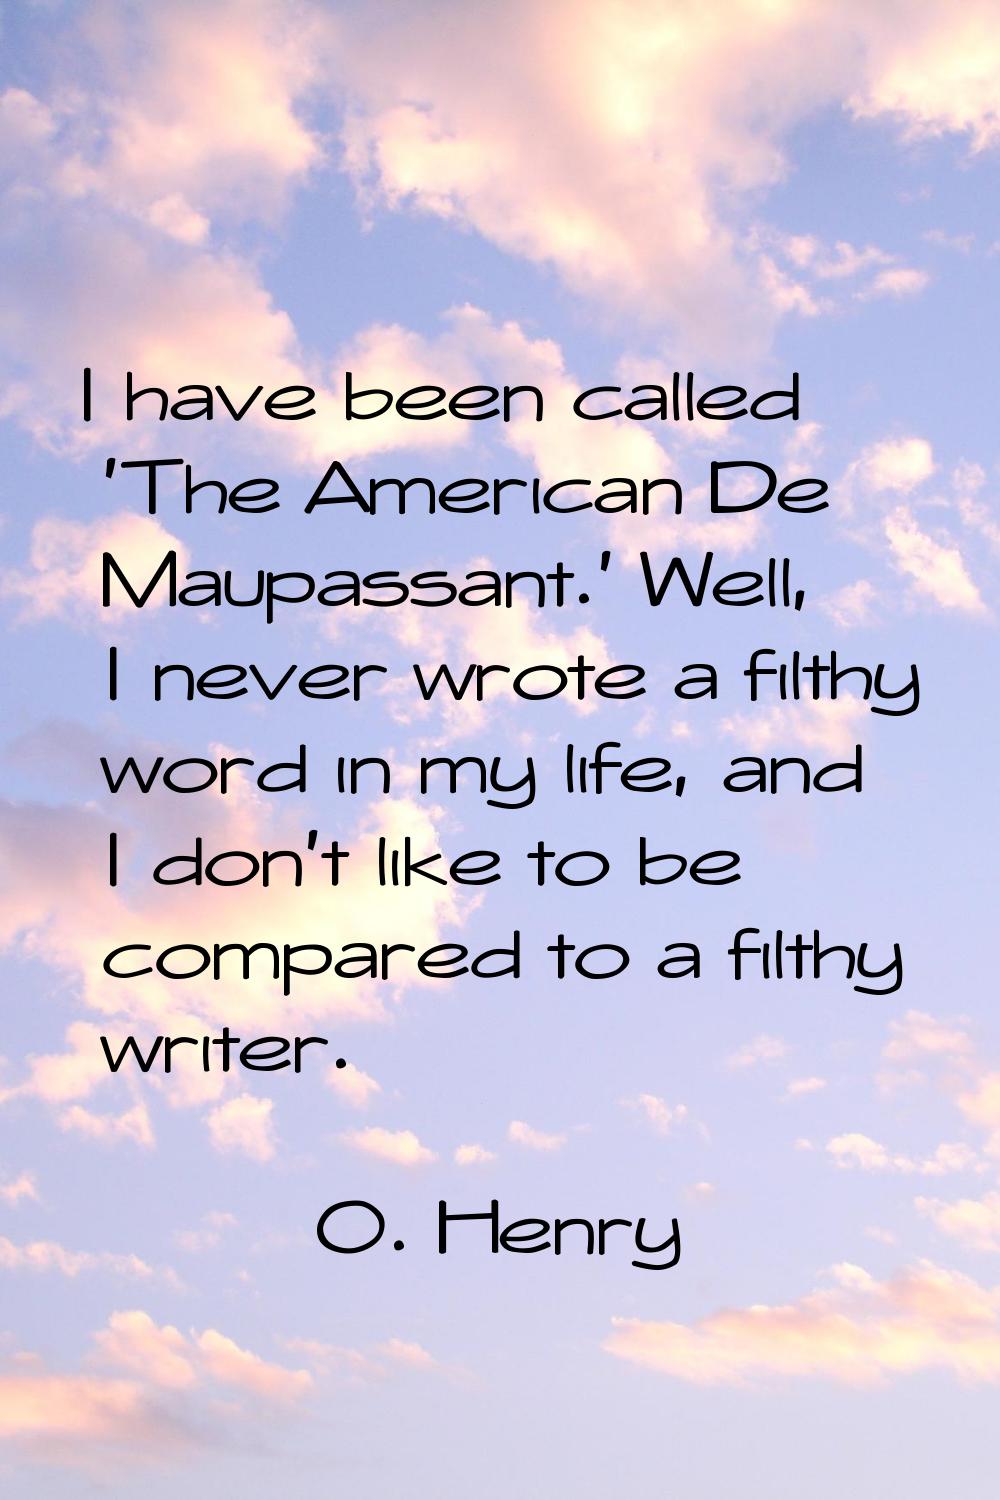 I have been called 'The American De Maupassant.' Well, I never wrote a filthy word in my life, and 